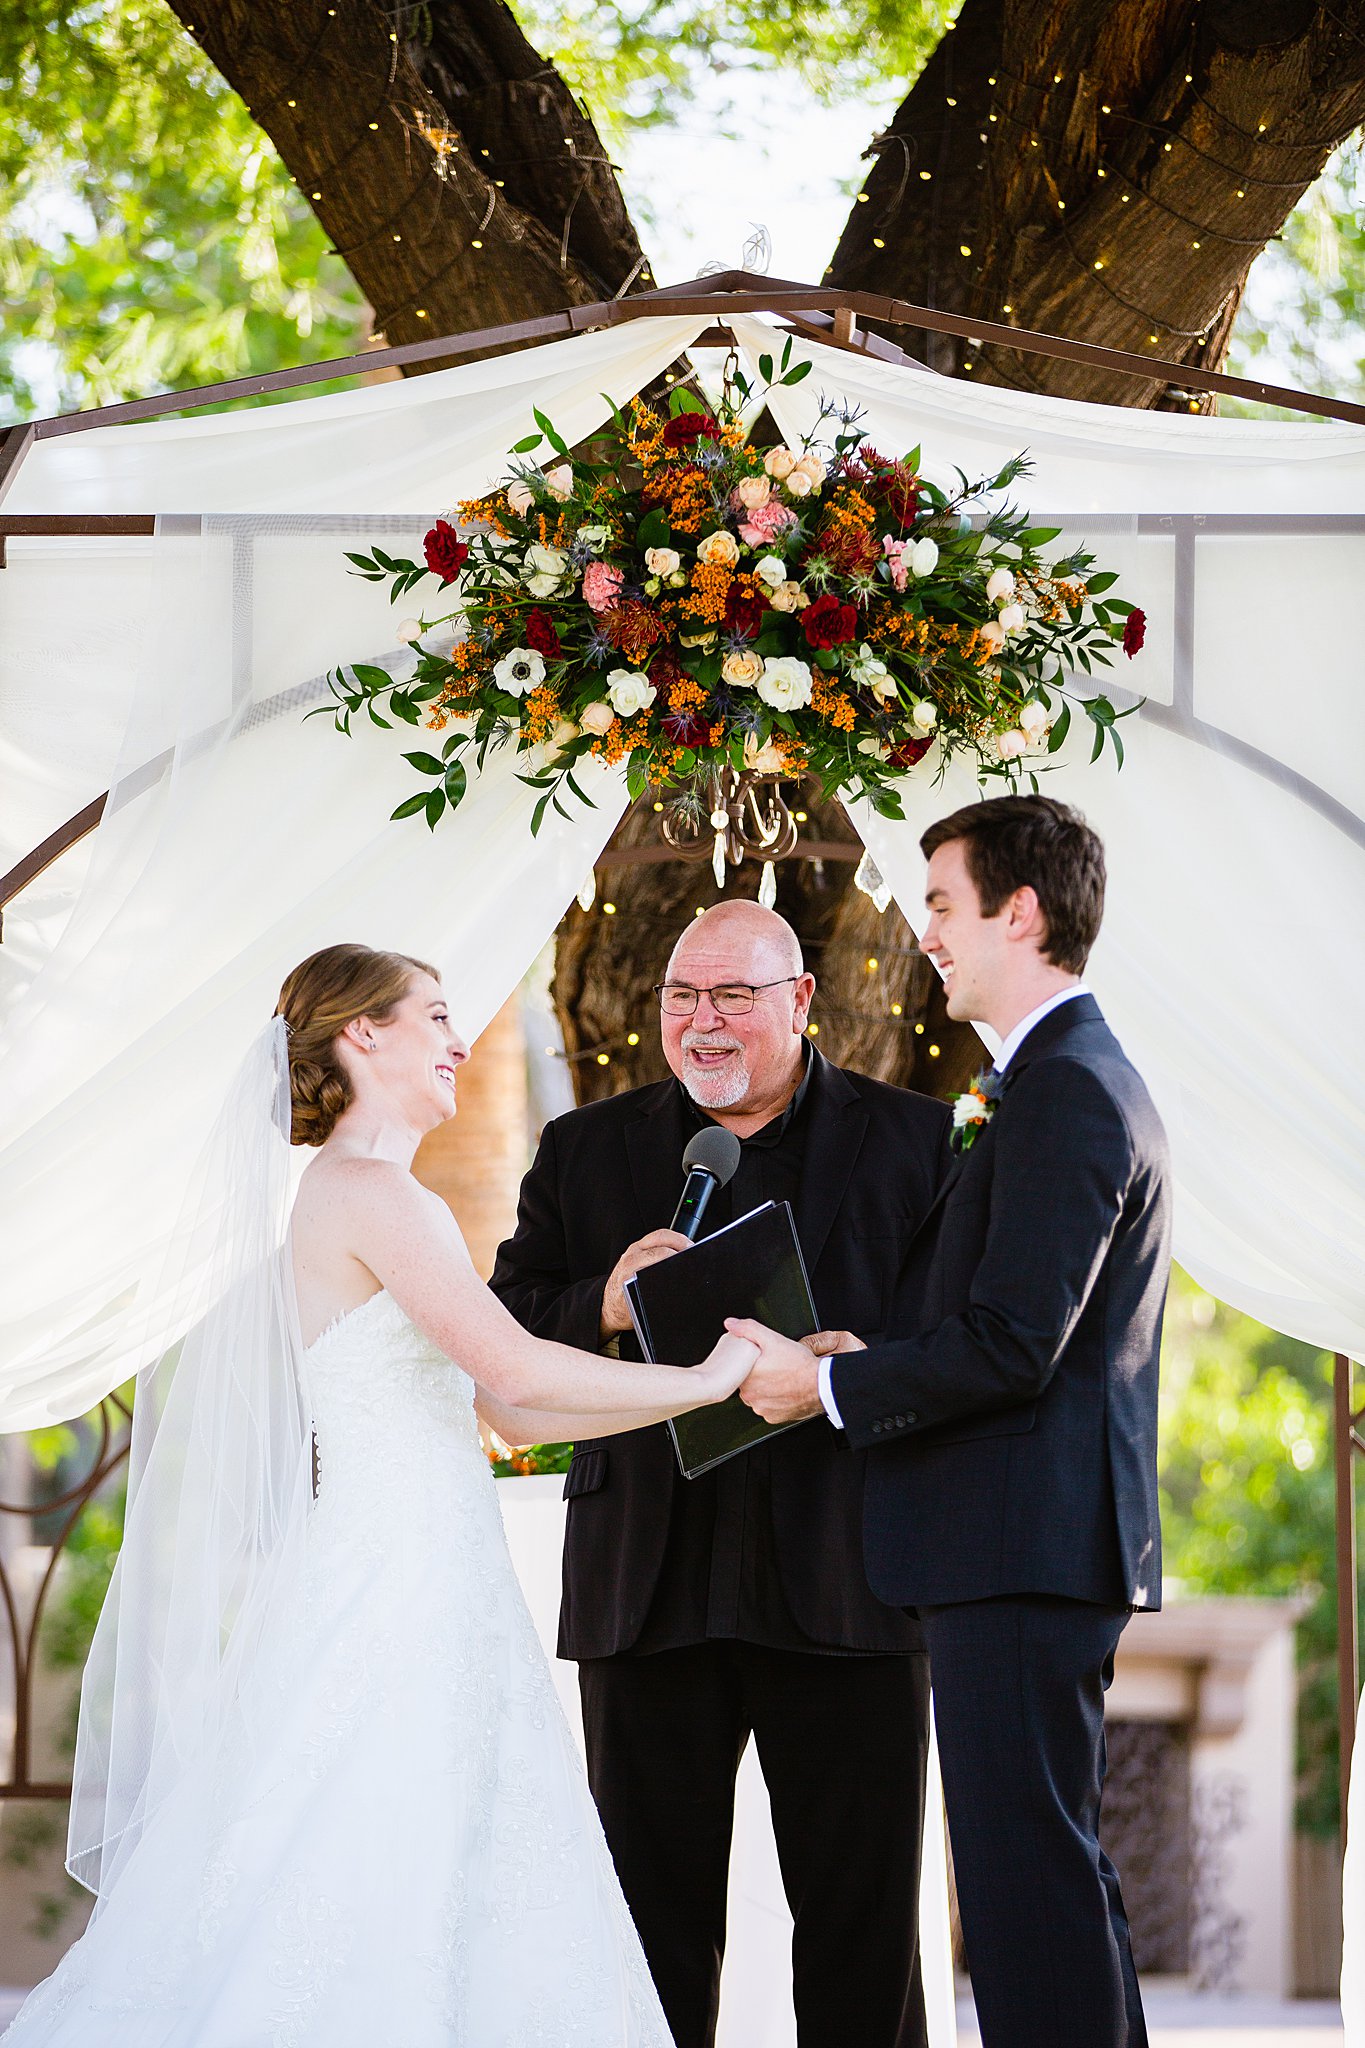 Bride and Groom togethering during Secret Garden Events wedding ceremony by Phoenix wedding photographer PMA Photography.